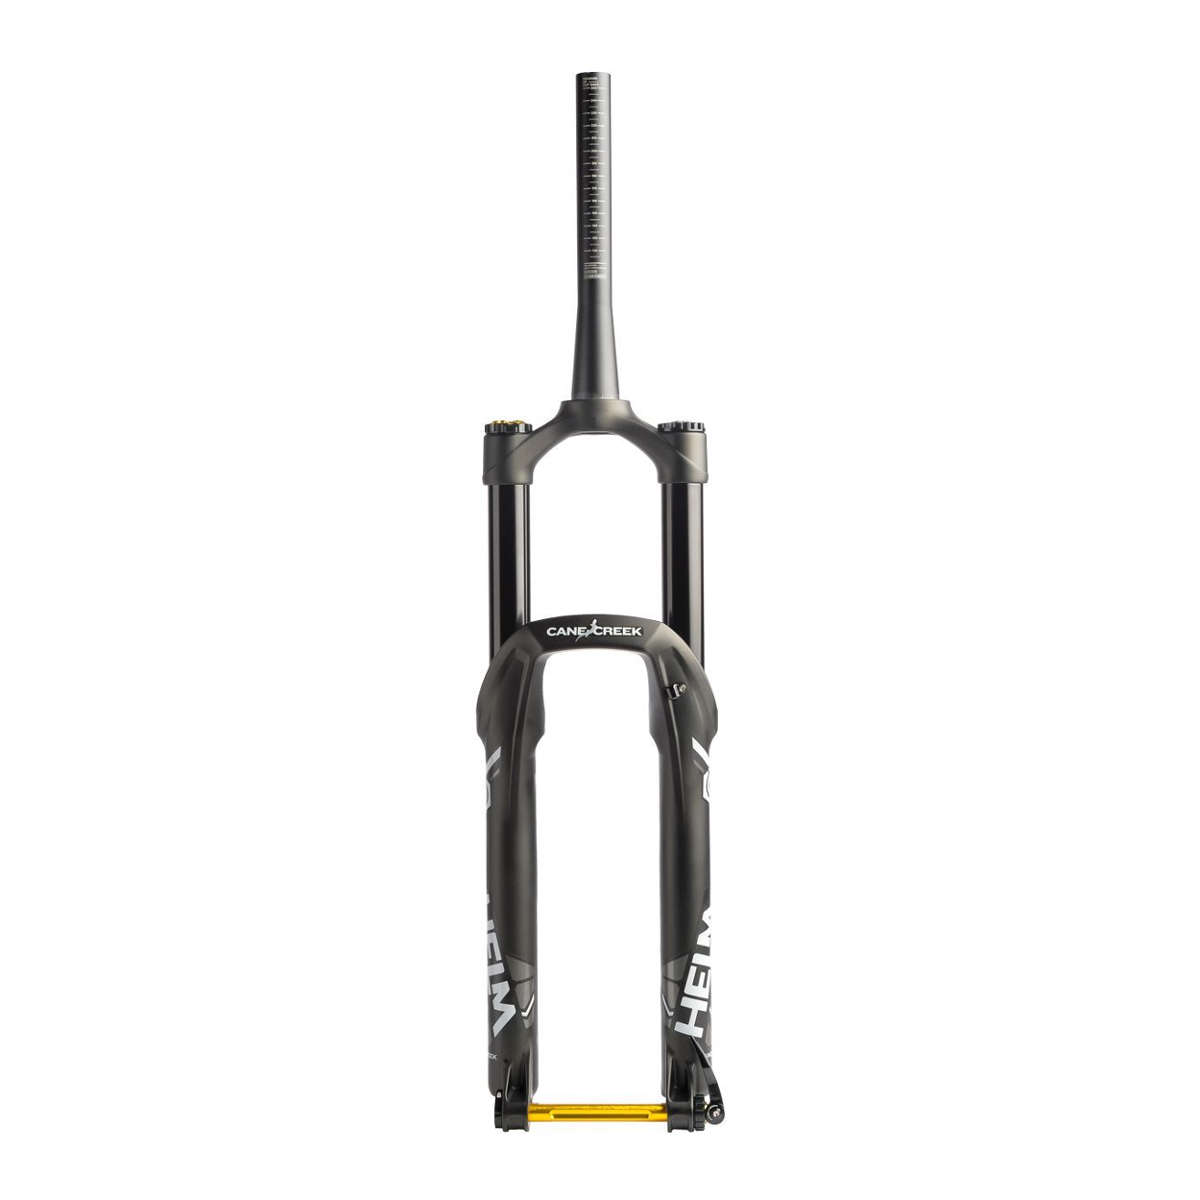 Cane Creek Suspension Fork Helm Air Black, 27.5 Inch, Tapered, 15x110 mm (Boost)